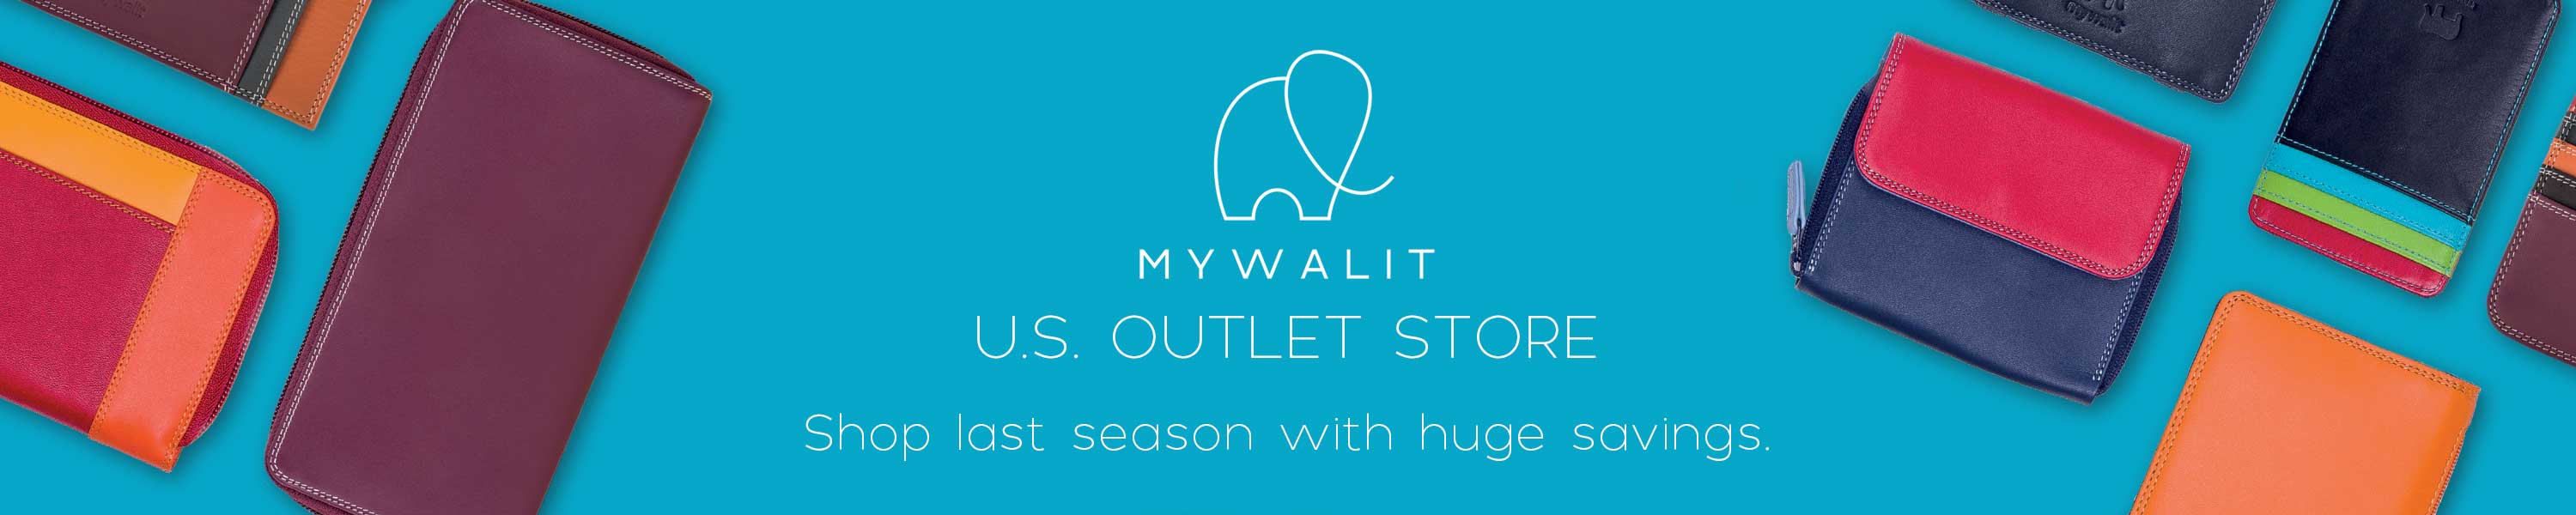 Mywalit U.S. Outlet Store – US Outlet